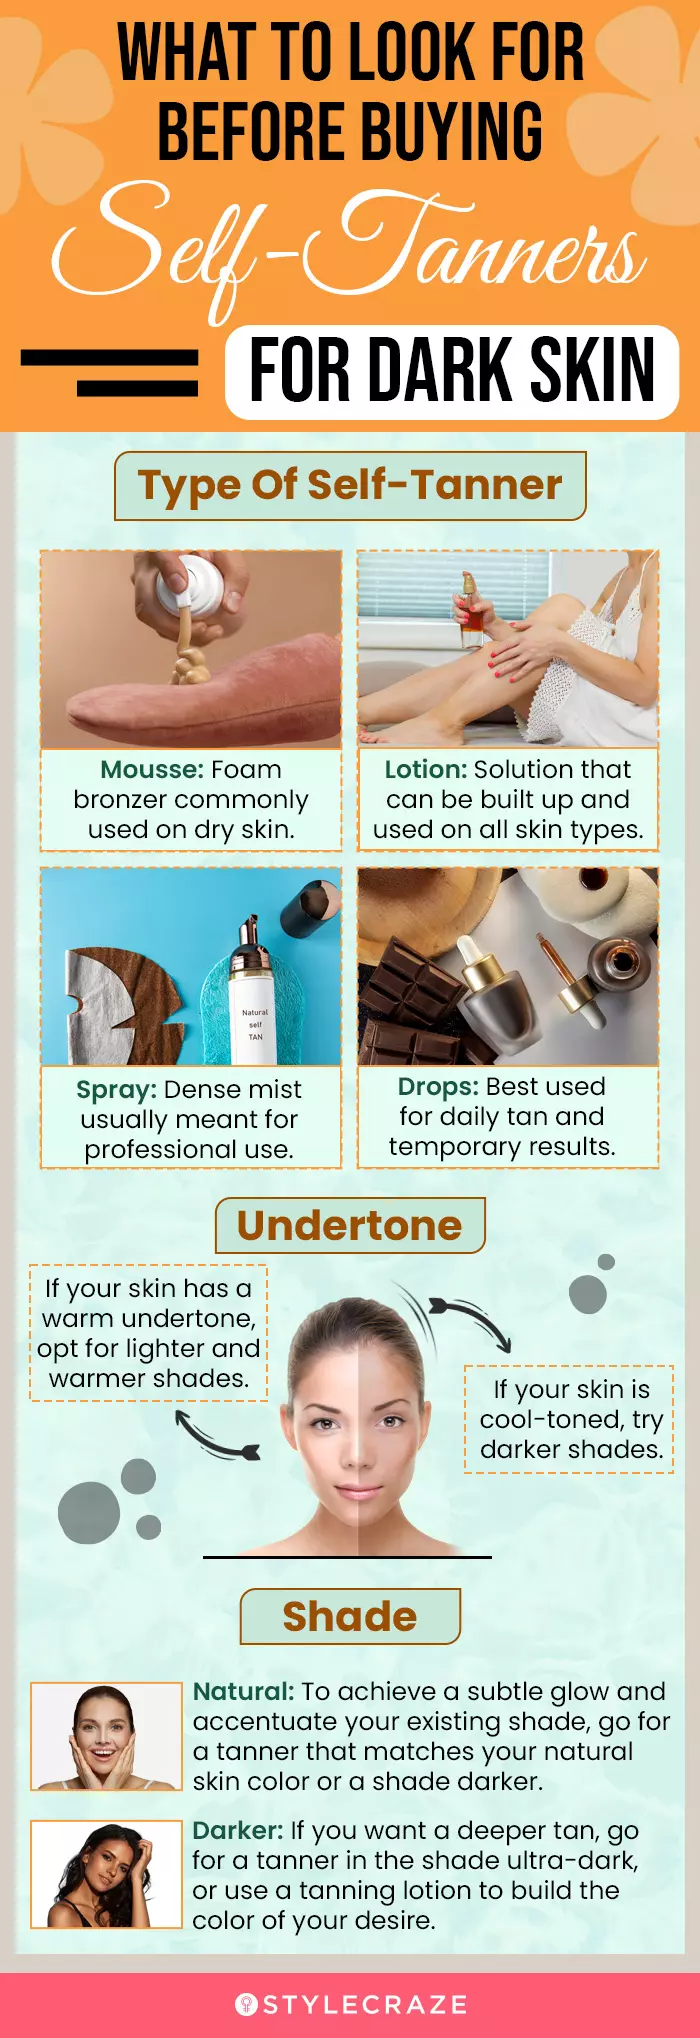 What To Look For Before Buying Self-Tanner For Dark Skin (infographic)